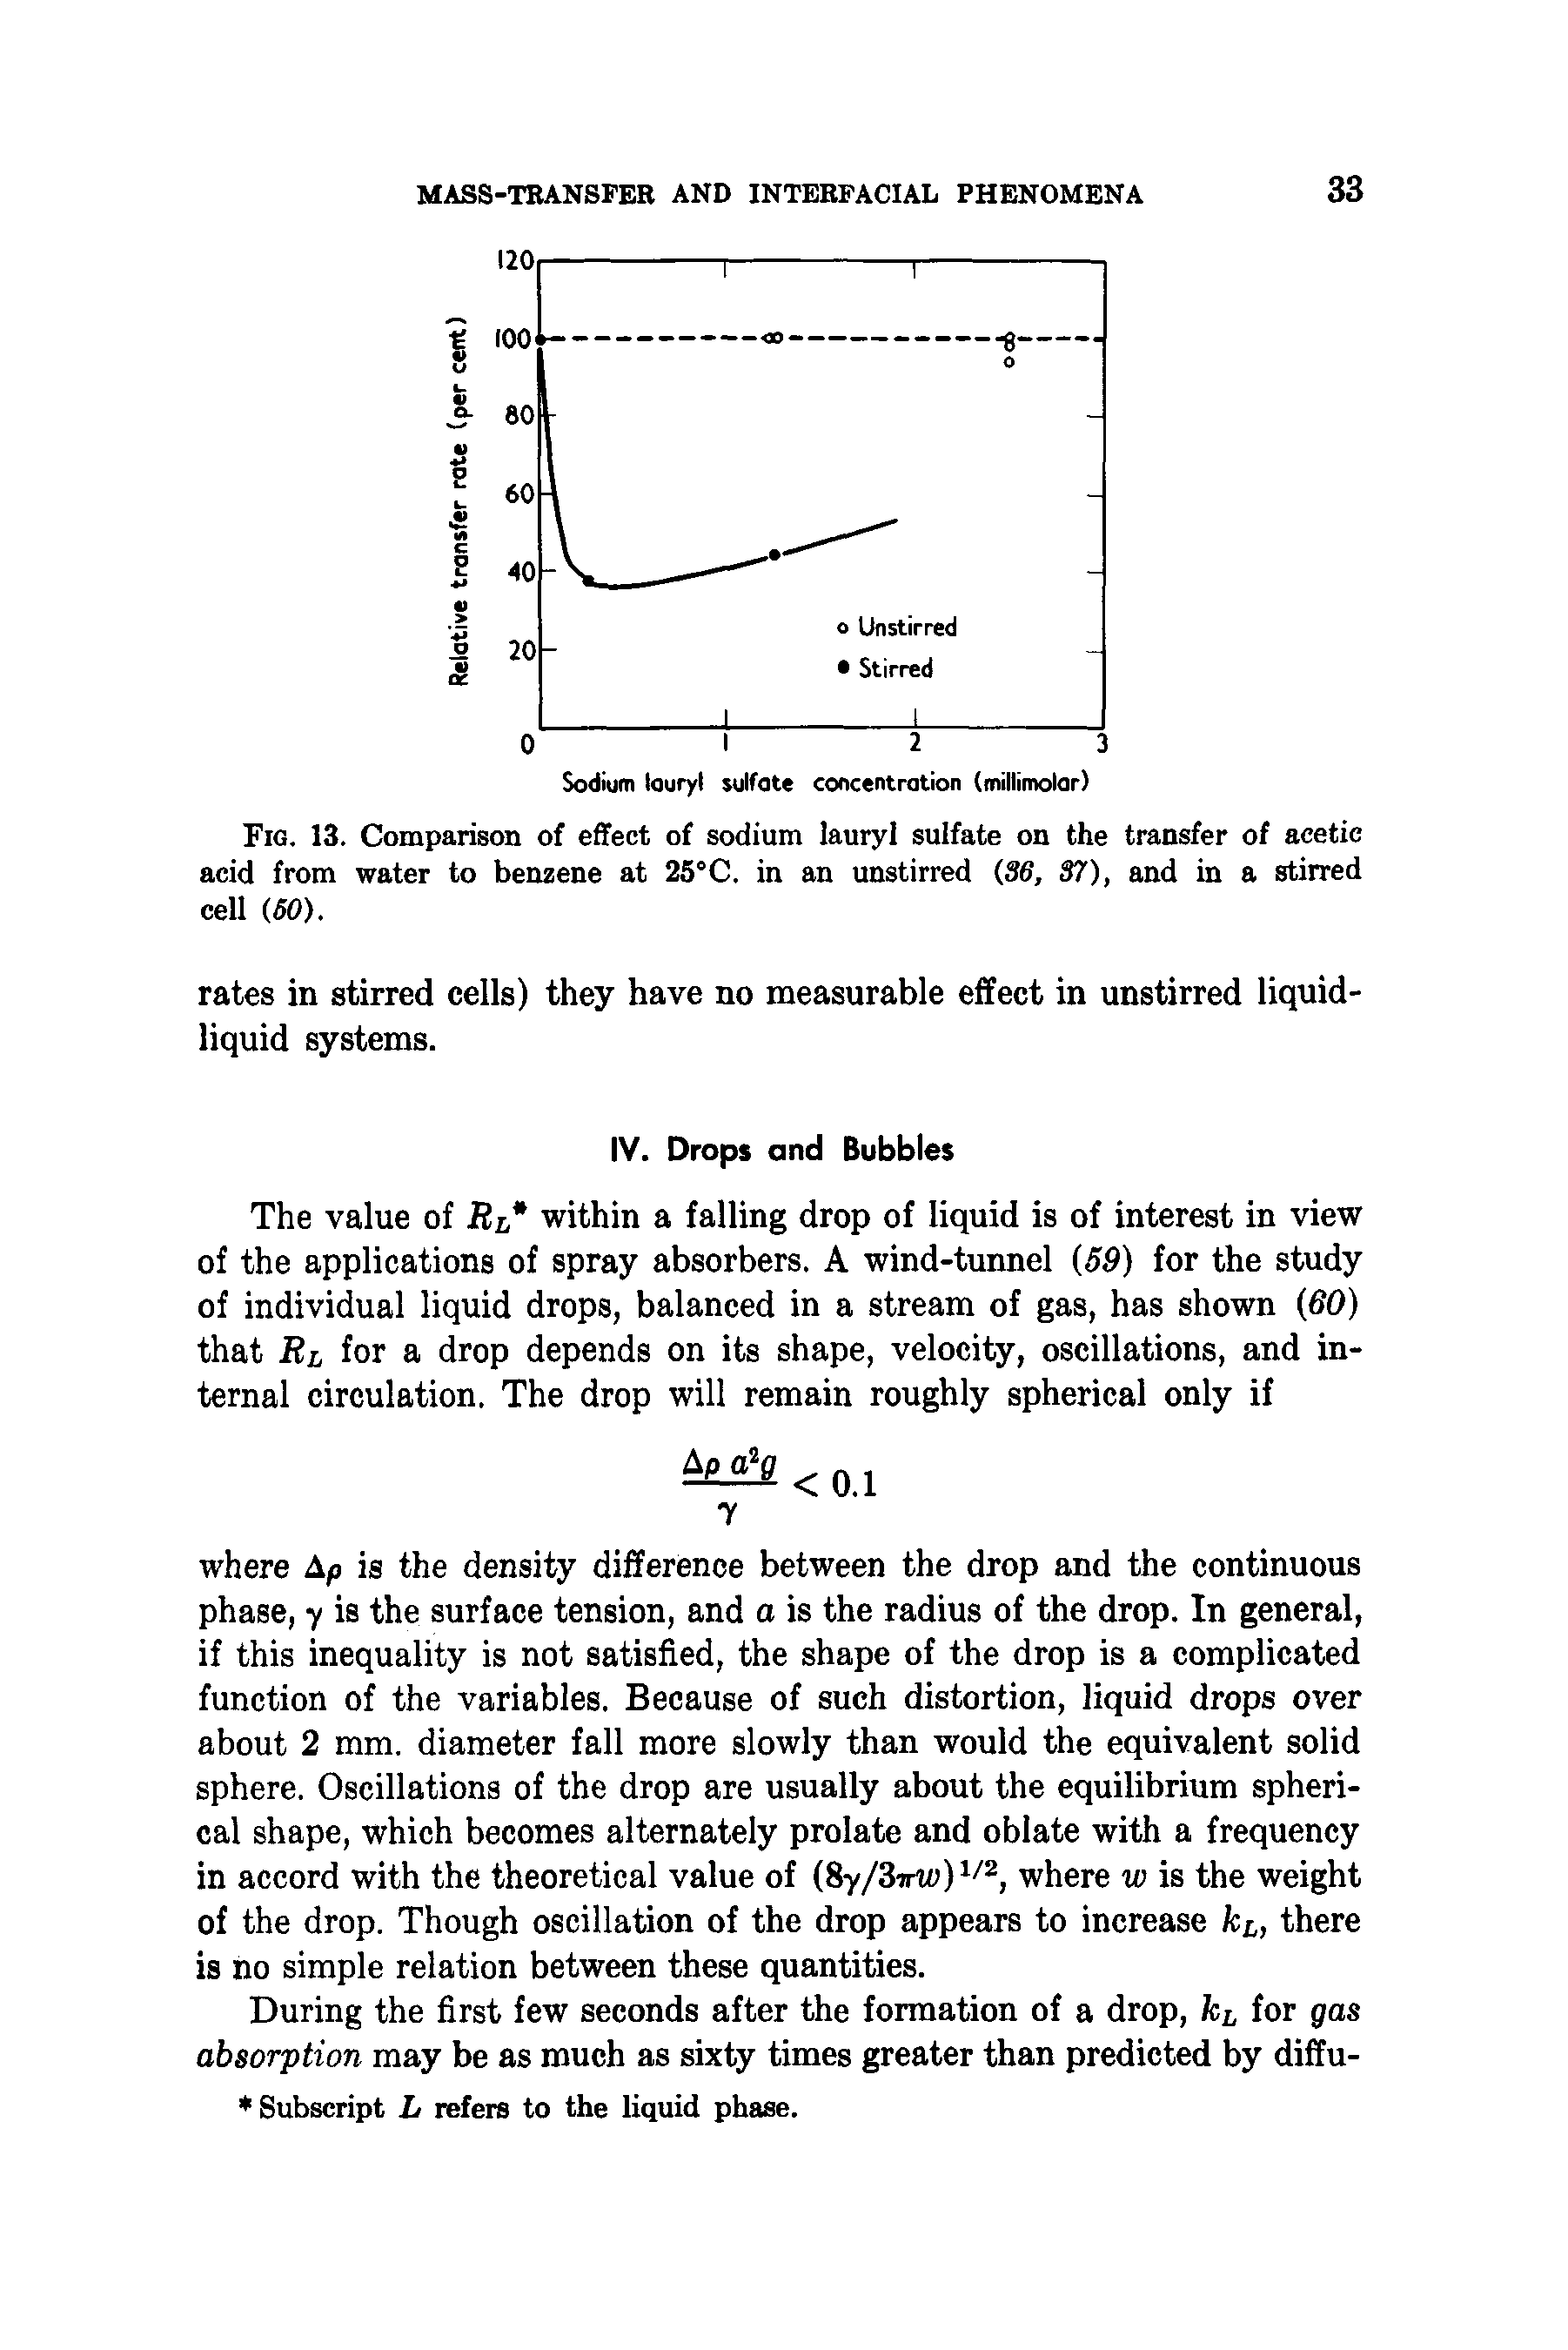 Fig. 13. Comparison of effect of sodium lauryl sulfate on the transfer of acetic acid from water to benzene at 25°C. in an unstirred (36, 37), and in a stirred cell (60).